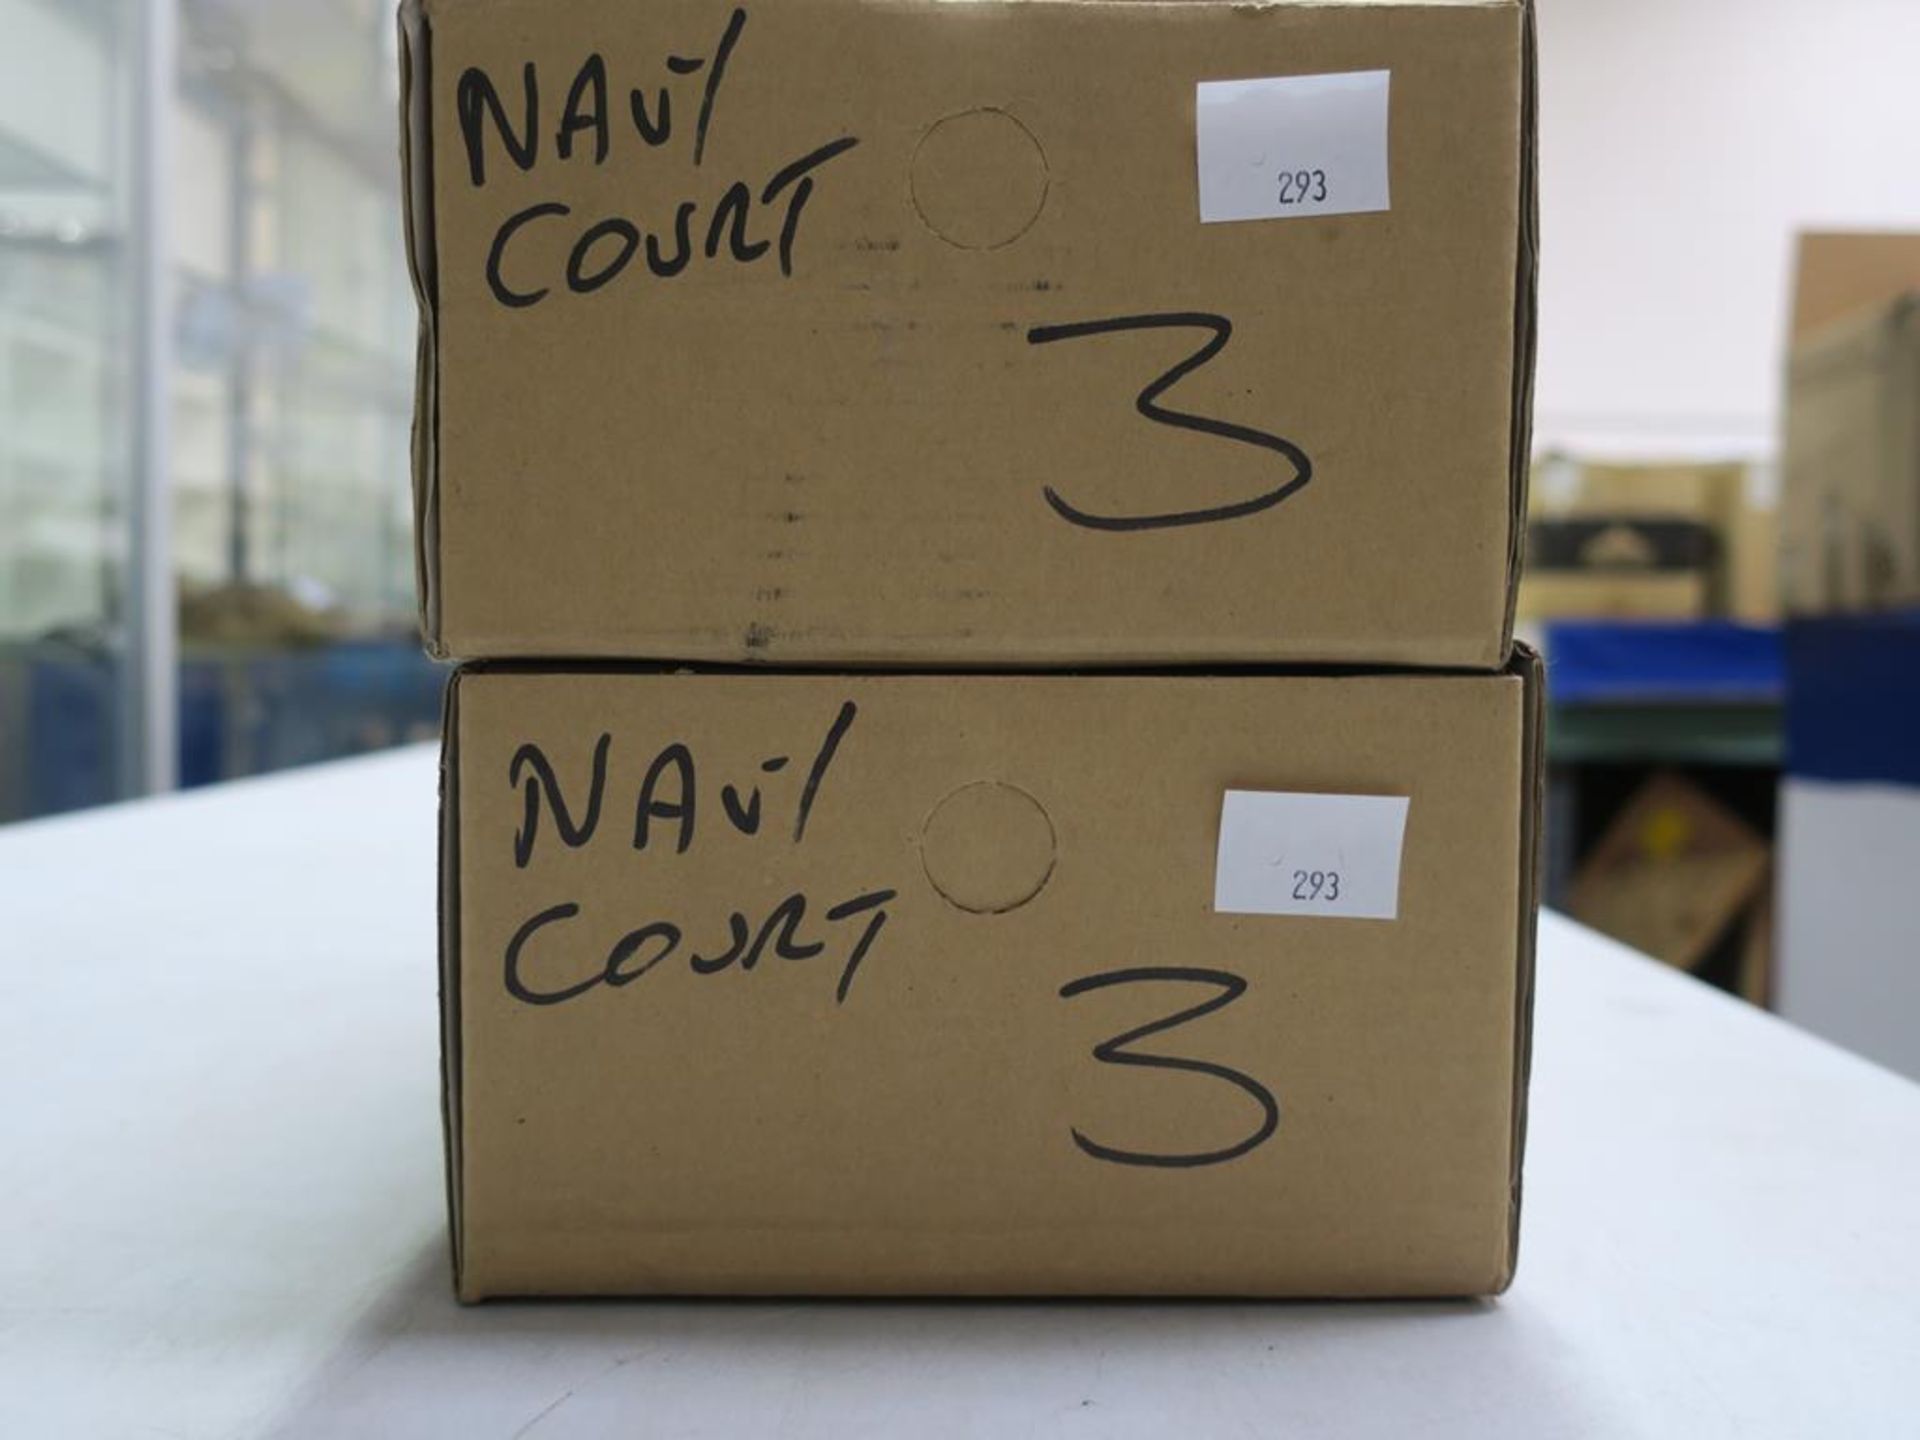 * Two pairs of New/Boxed Ladies Navy Court Safety Shoes size 3 (2) - Image 3 of 3